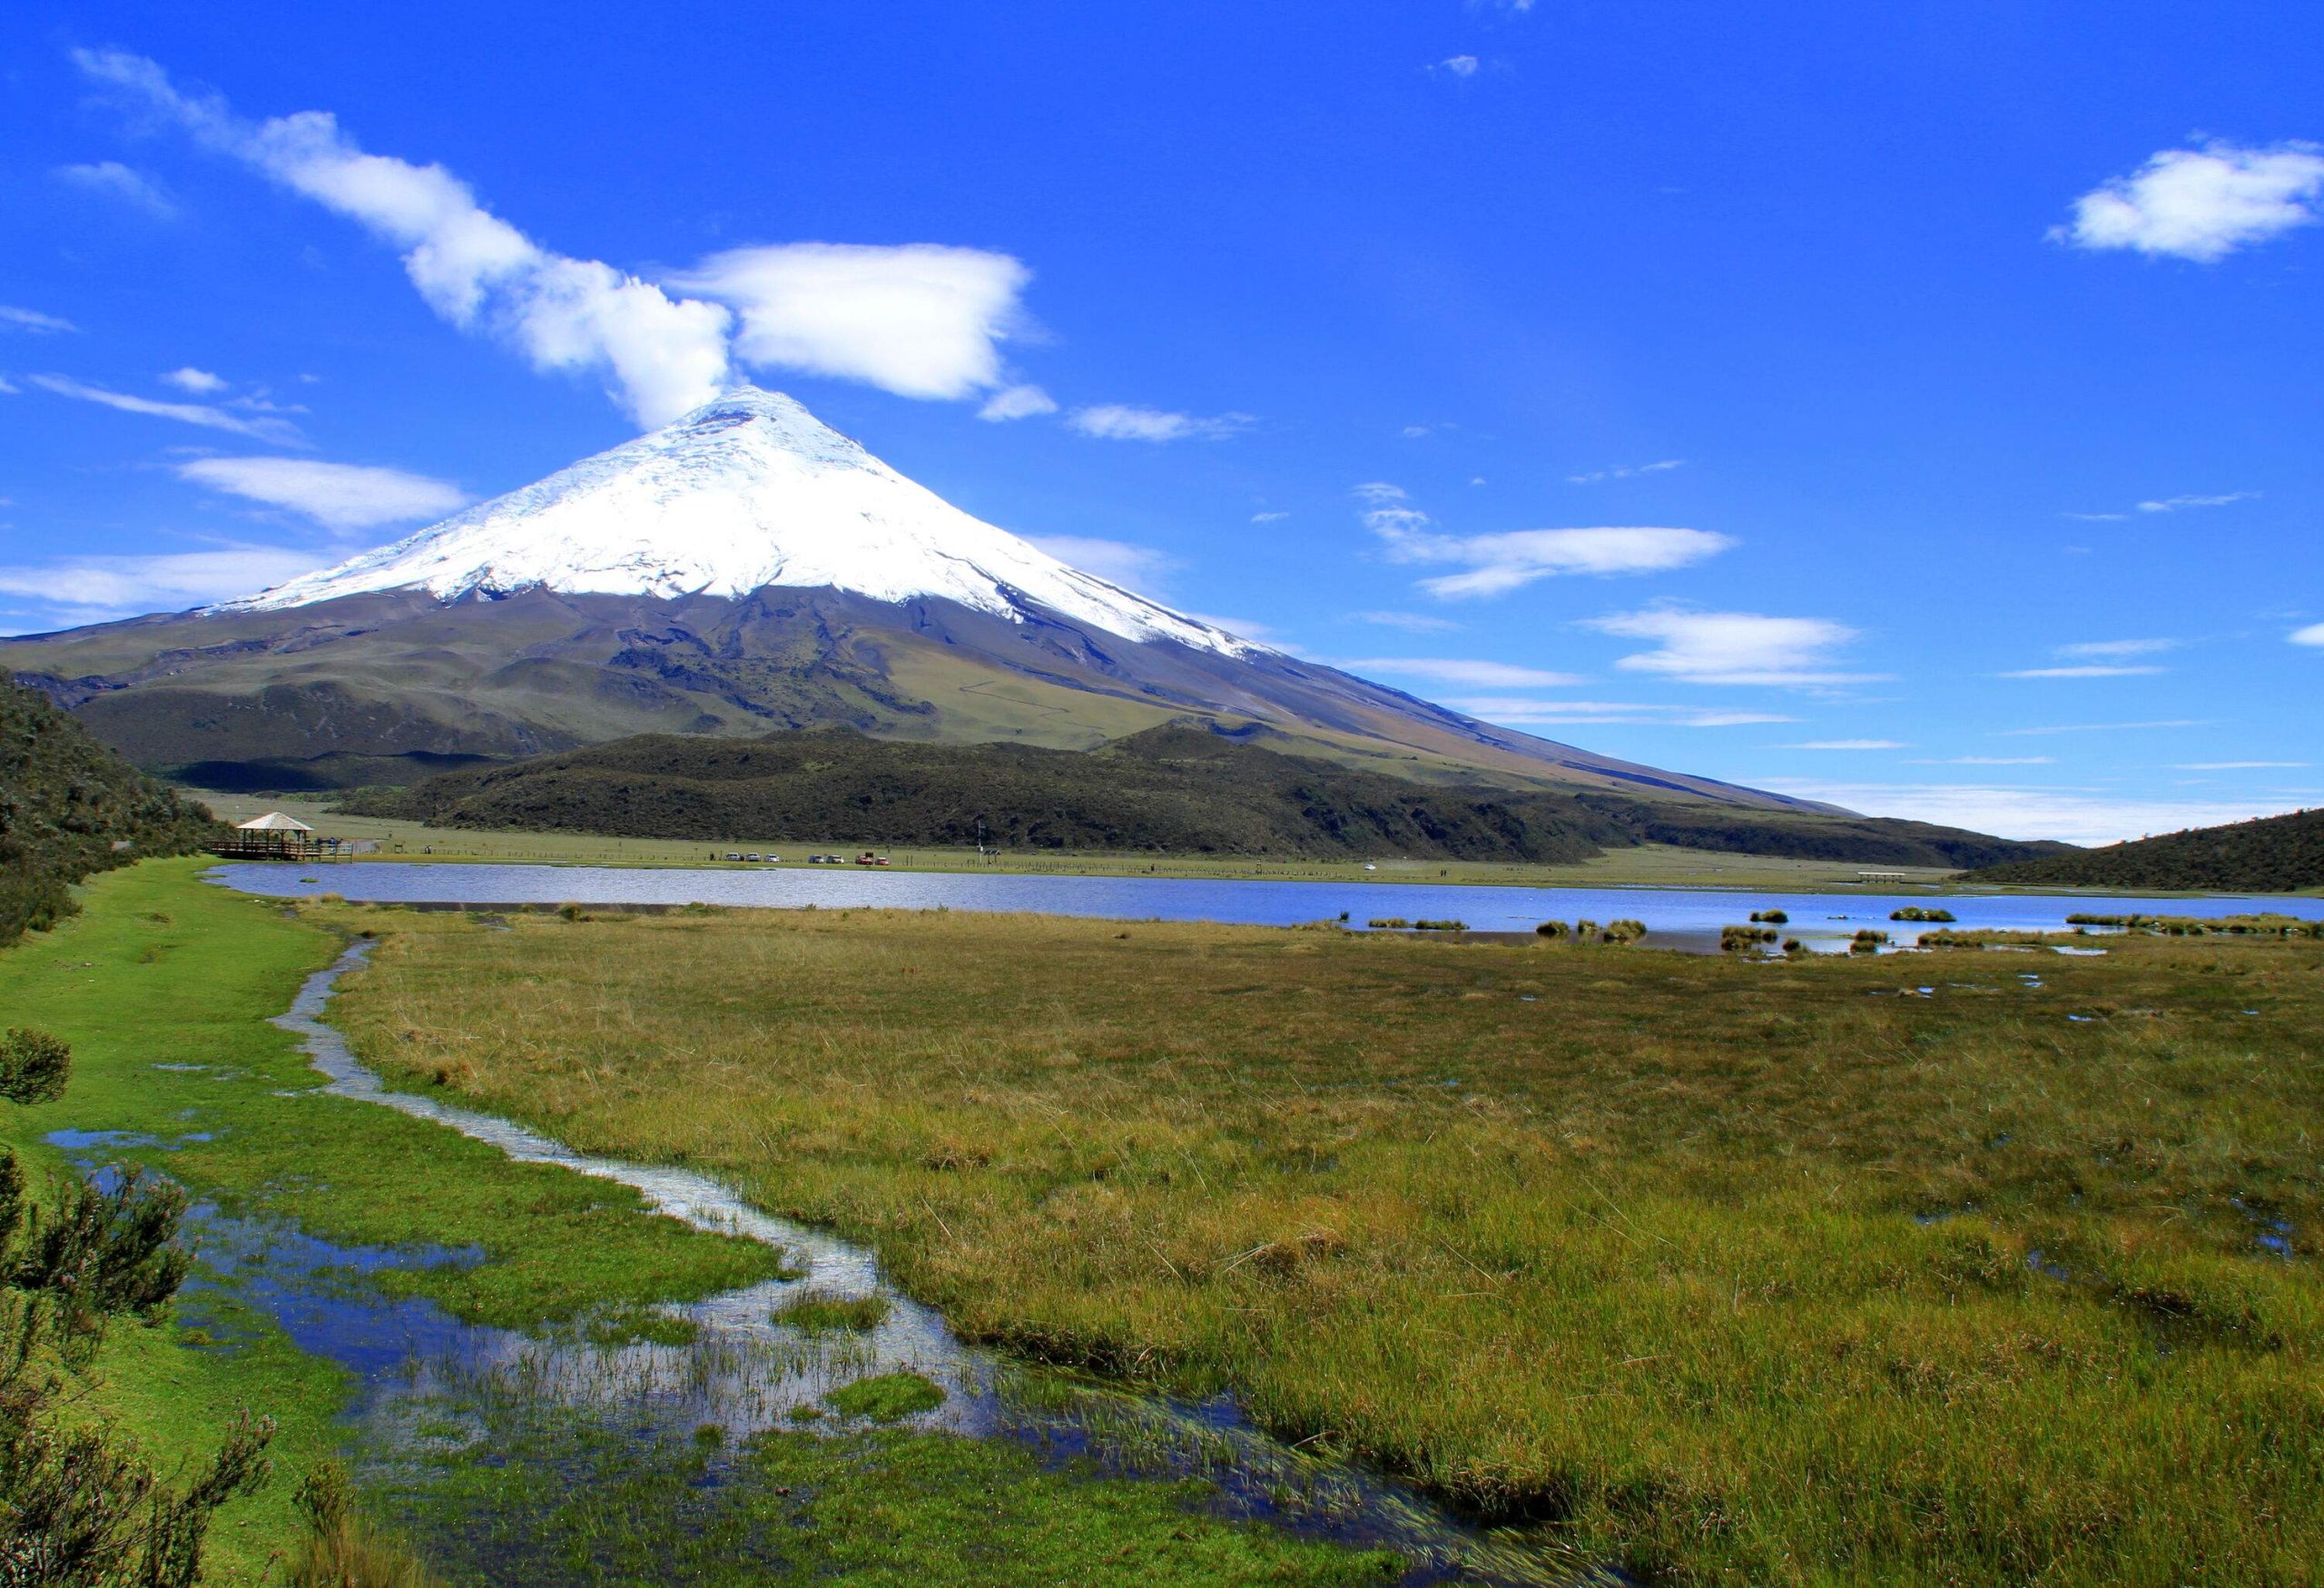 A large marsh beside a lagoon at the base of a snow-capped volcano.